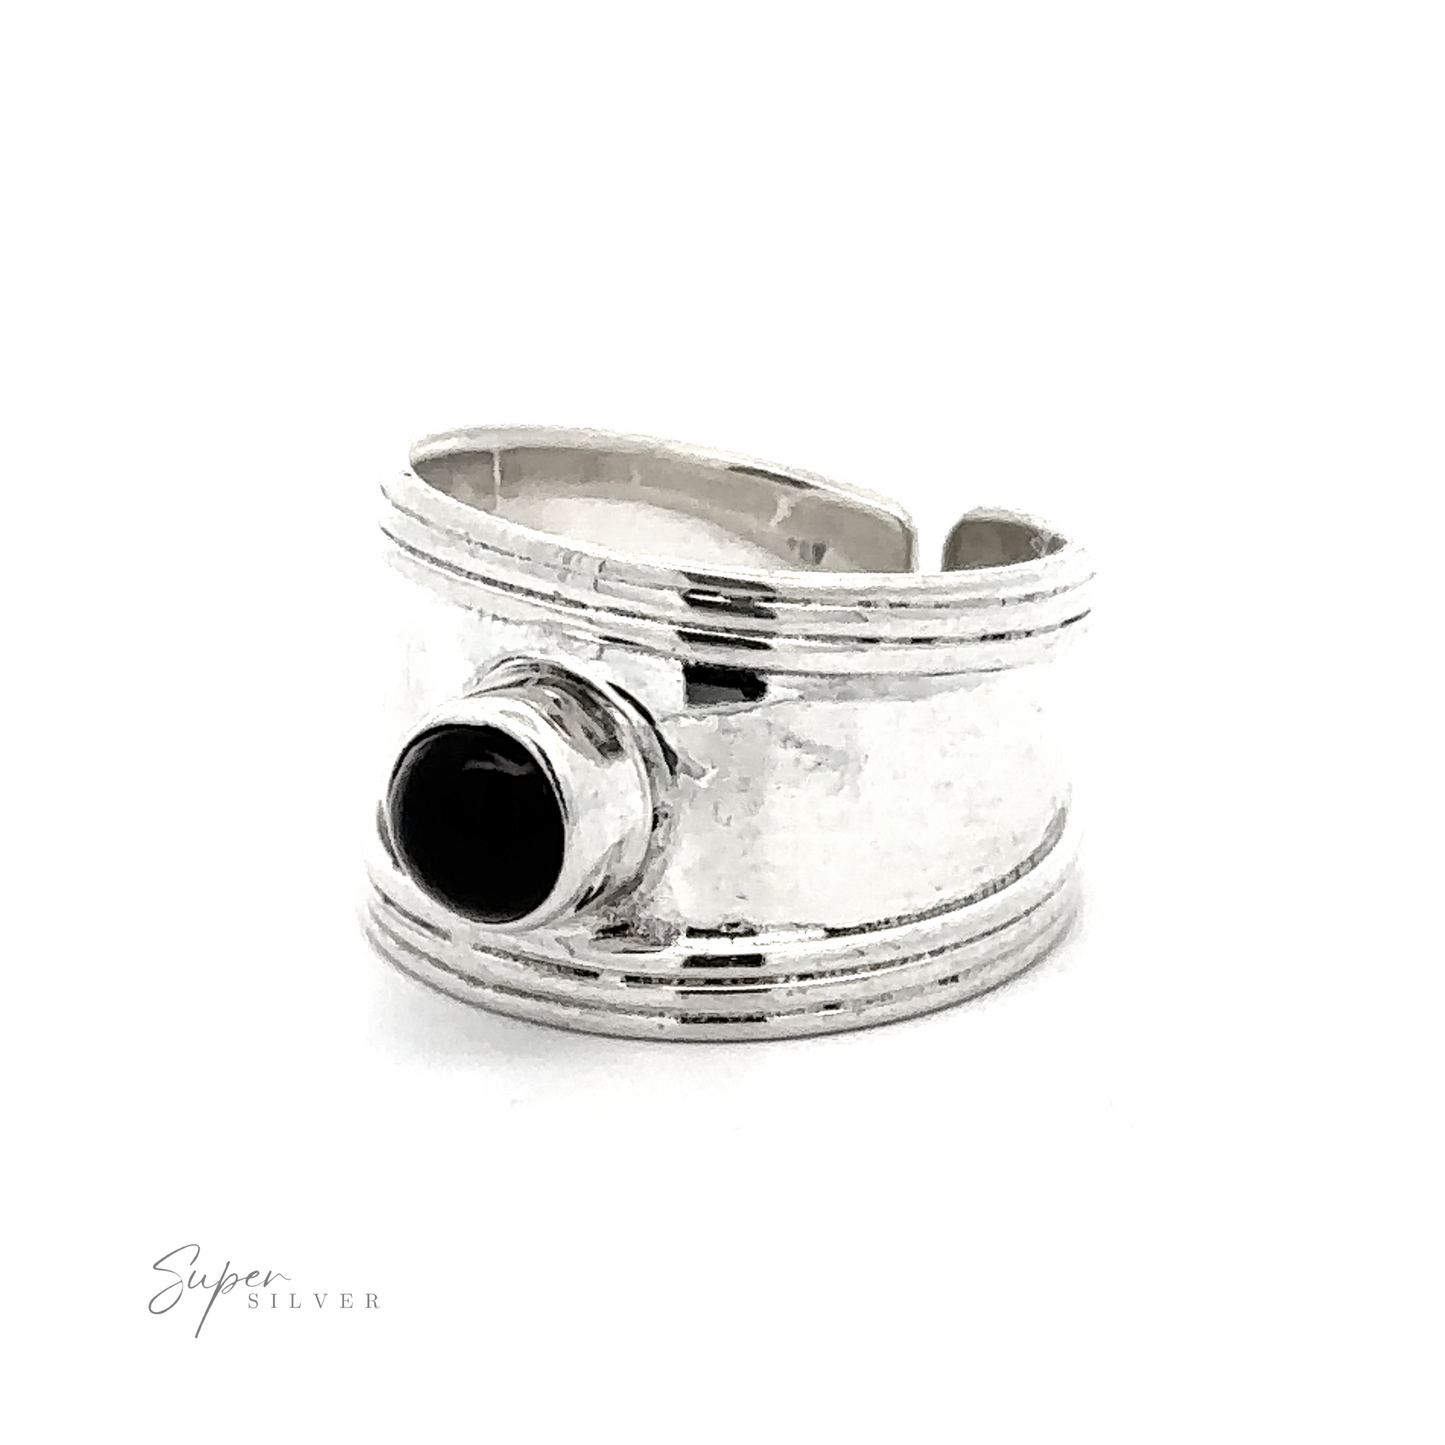 
                  
                    A Adjustable Wide Cigar Band Toe Ring with Gemstone featuring a black stone and wrapped band design, displayed against a white background.
                  
                